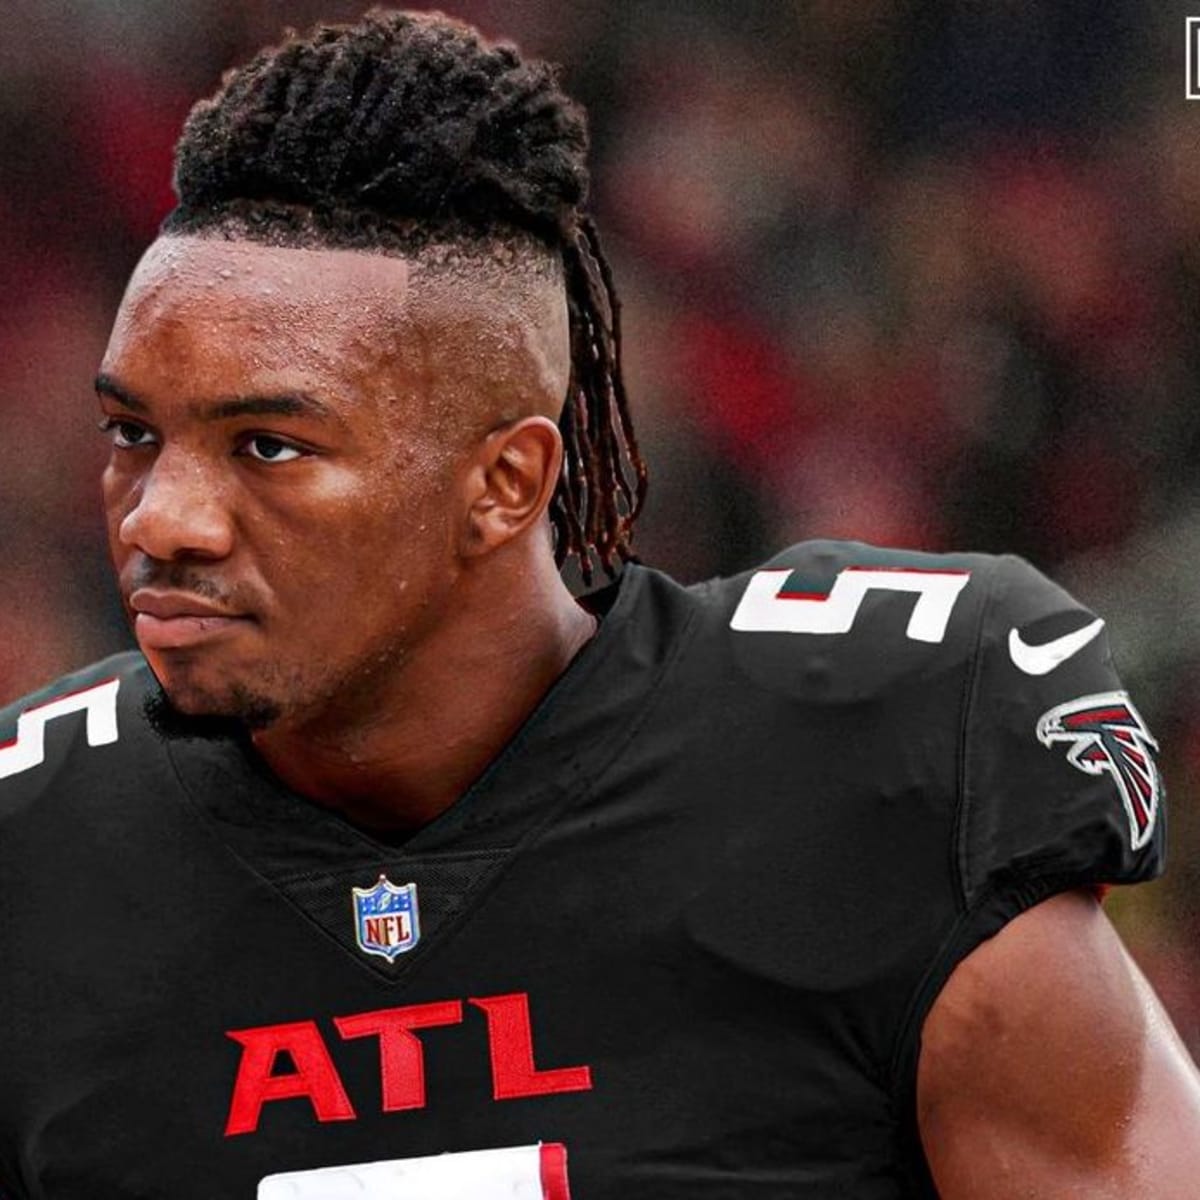 Bijan Robinson returns to practice after a reported headache that raised questions. Expect Robinson to play against the Titans. #NFL #AtlantaFalcons #BijanRobinson